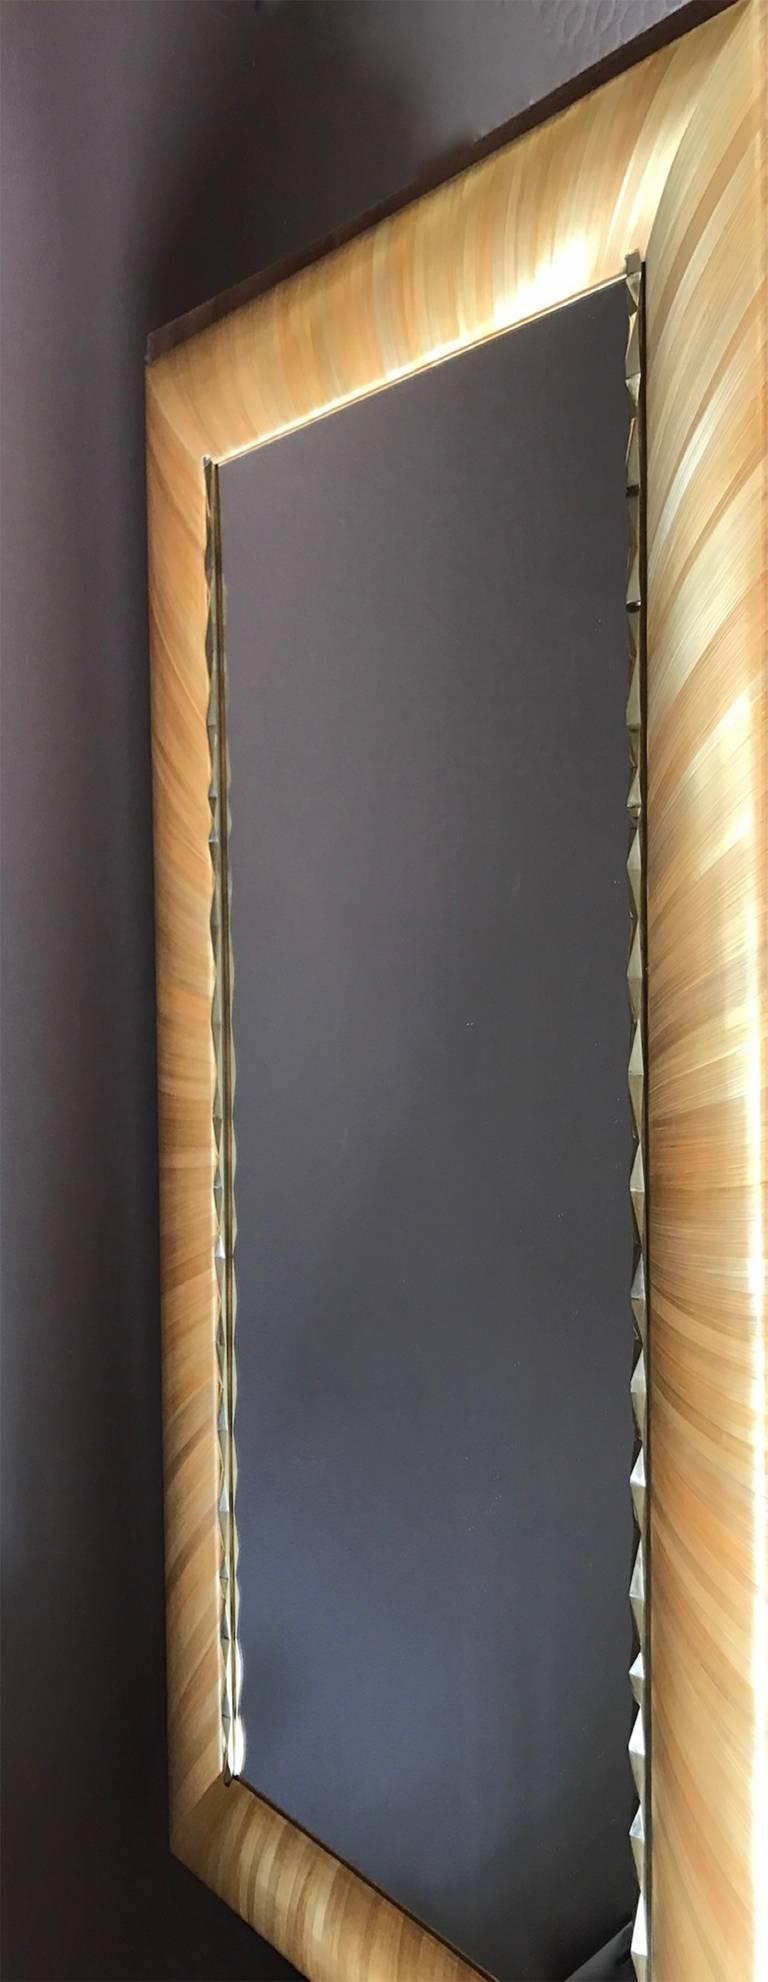 Unique French brass and straw marquetry mirror made in shiny polished brass and embossed golden straw marquetry in a radiant design style.
Wonderful four hands creation with Atelier R.E.